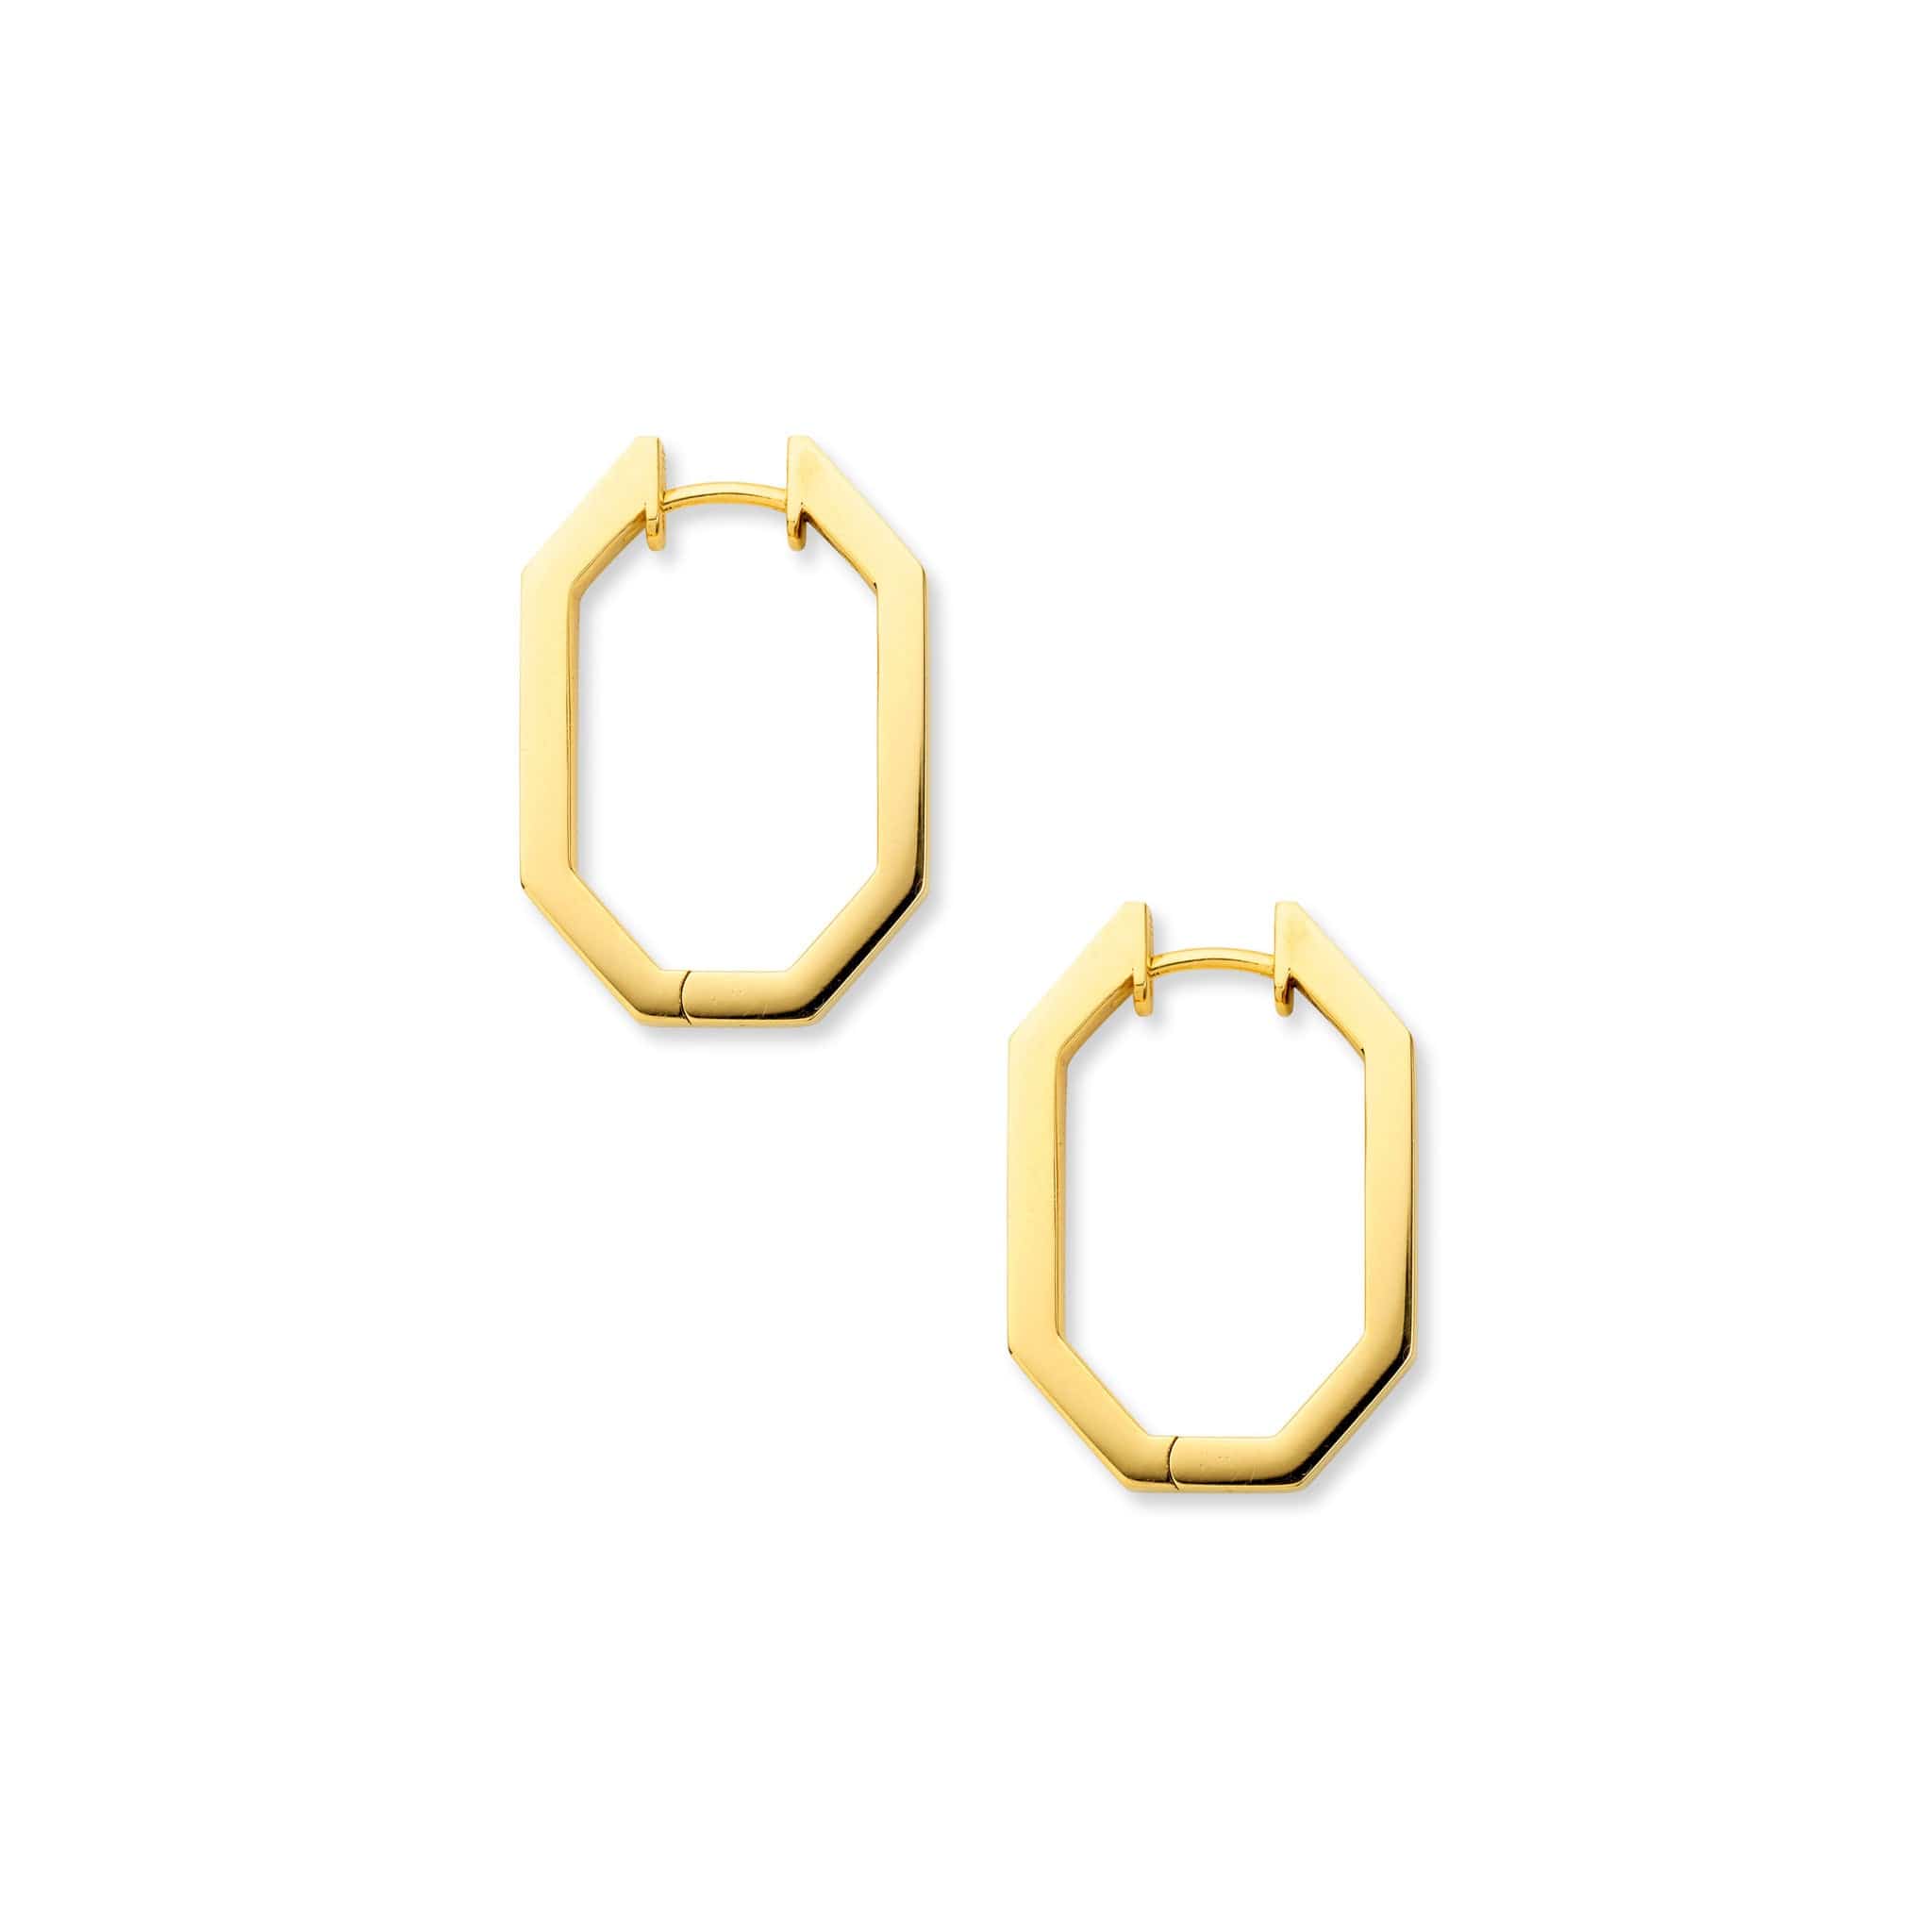 A pair of unique shaped gold octagon hoop earrings lying flat.